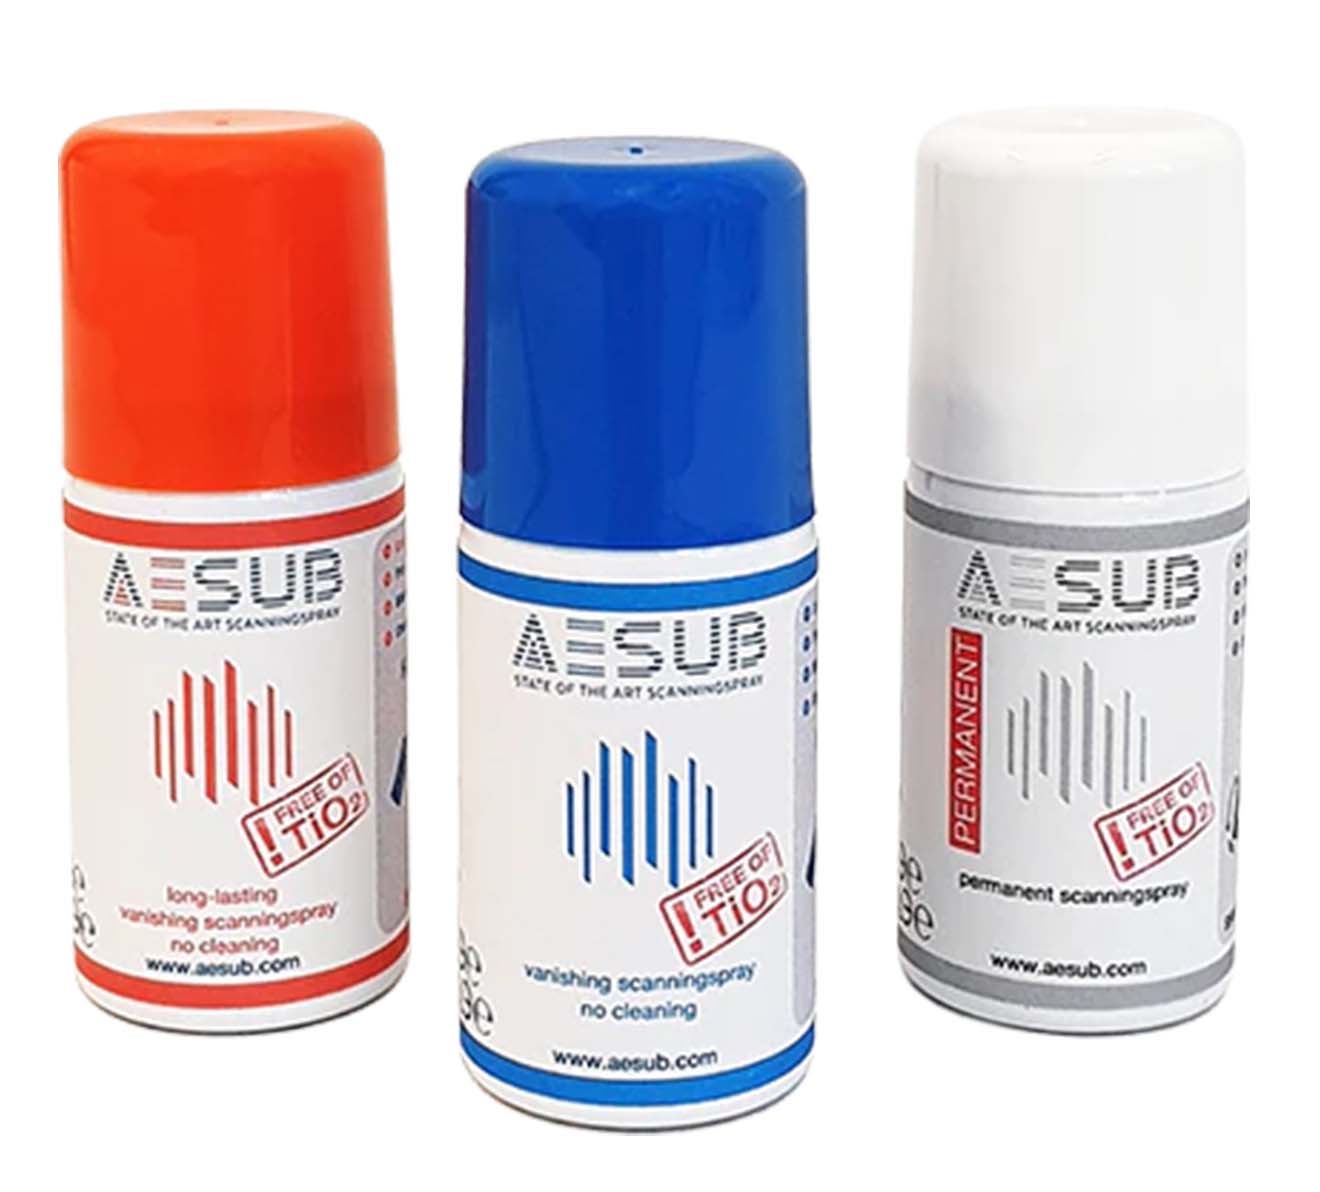 AESUB Scanning paint for sale